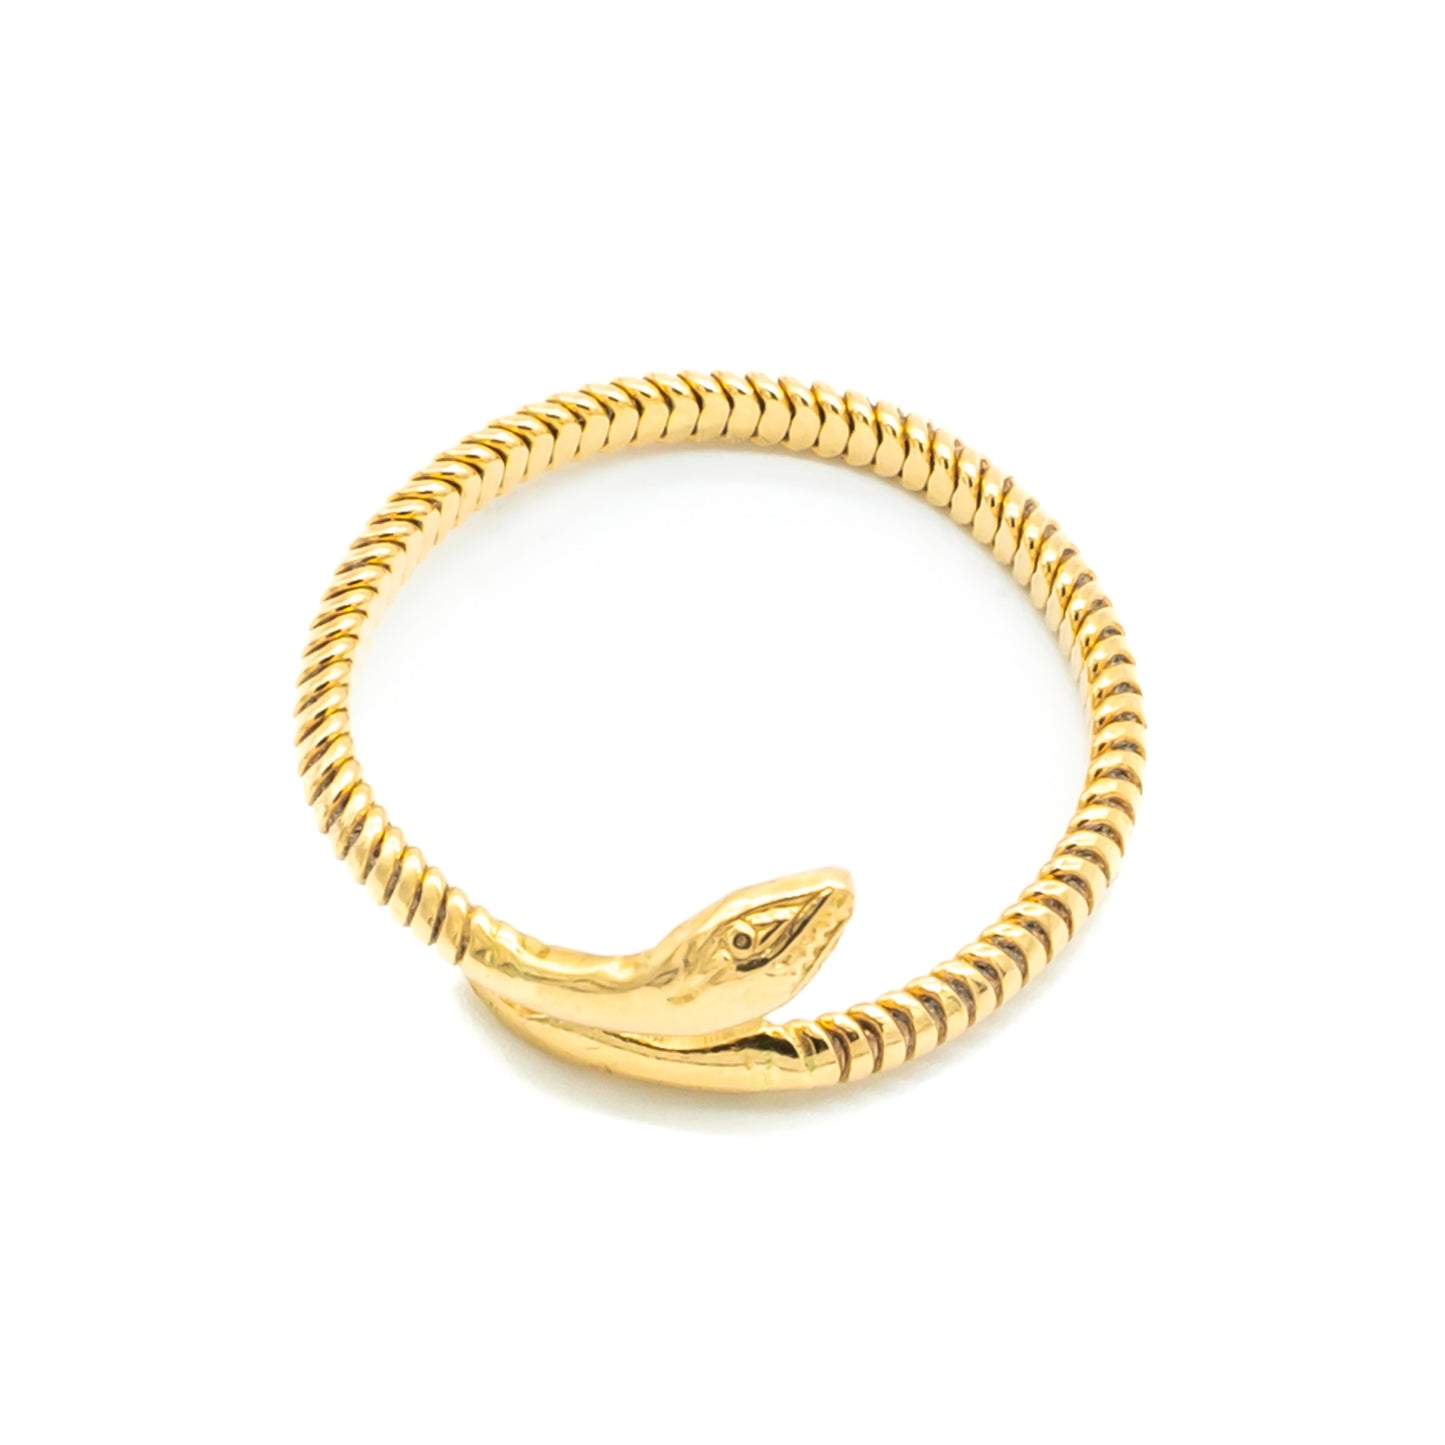 Charming 18ct yellow gold serpent ring with lovely detail.